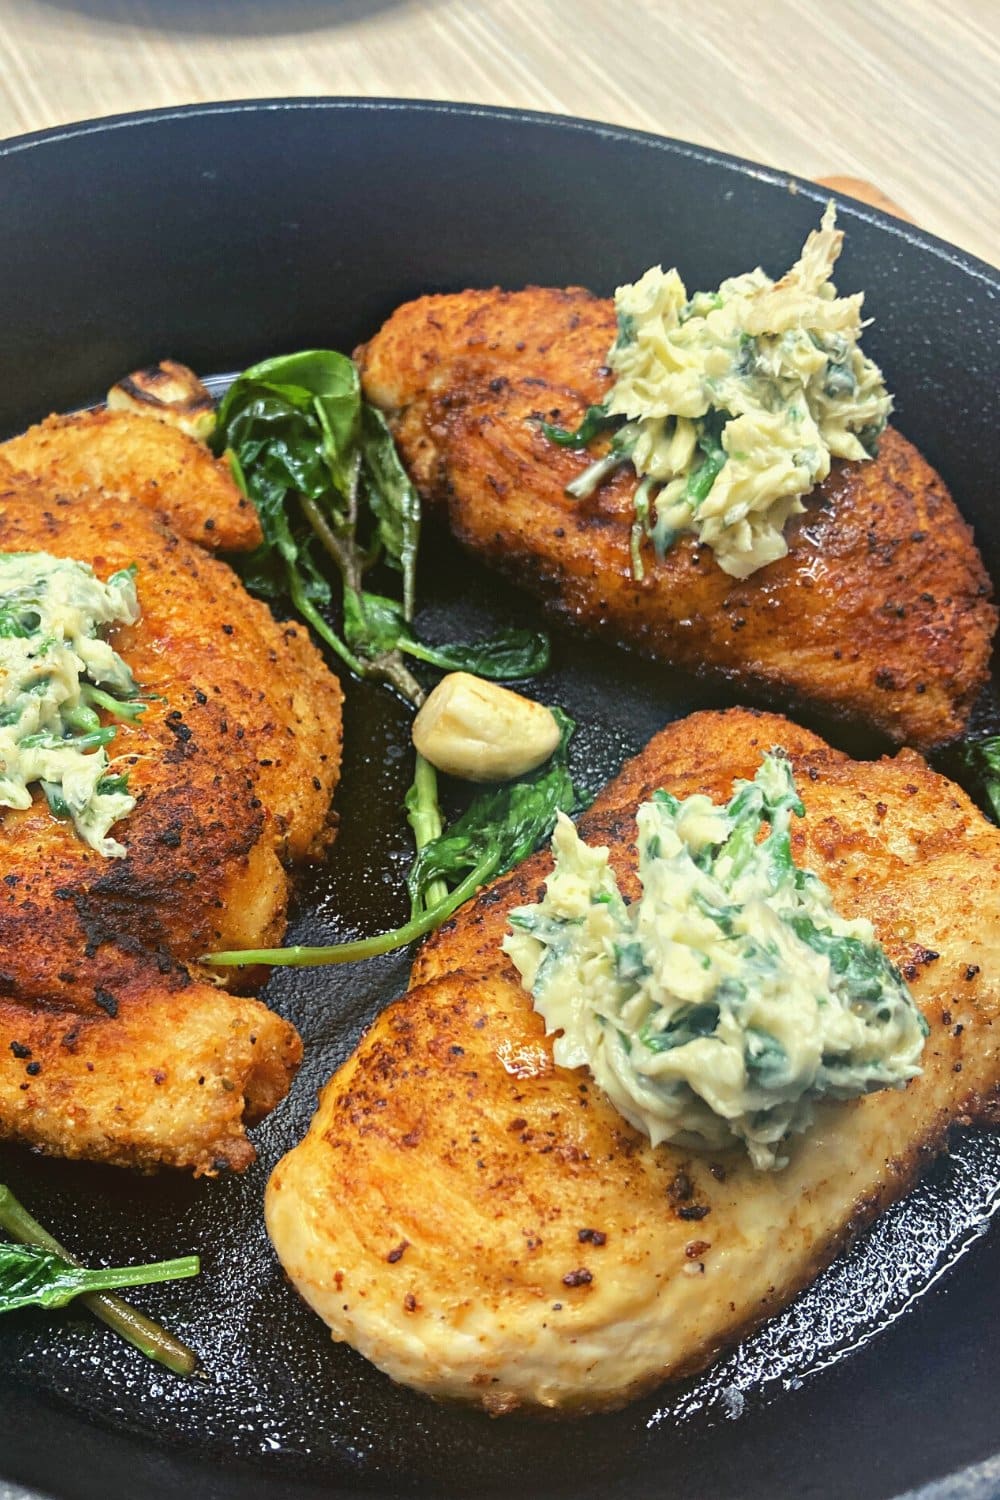 Juicy Cast Iron Skillet Chicken Breast Recipe in No Time